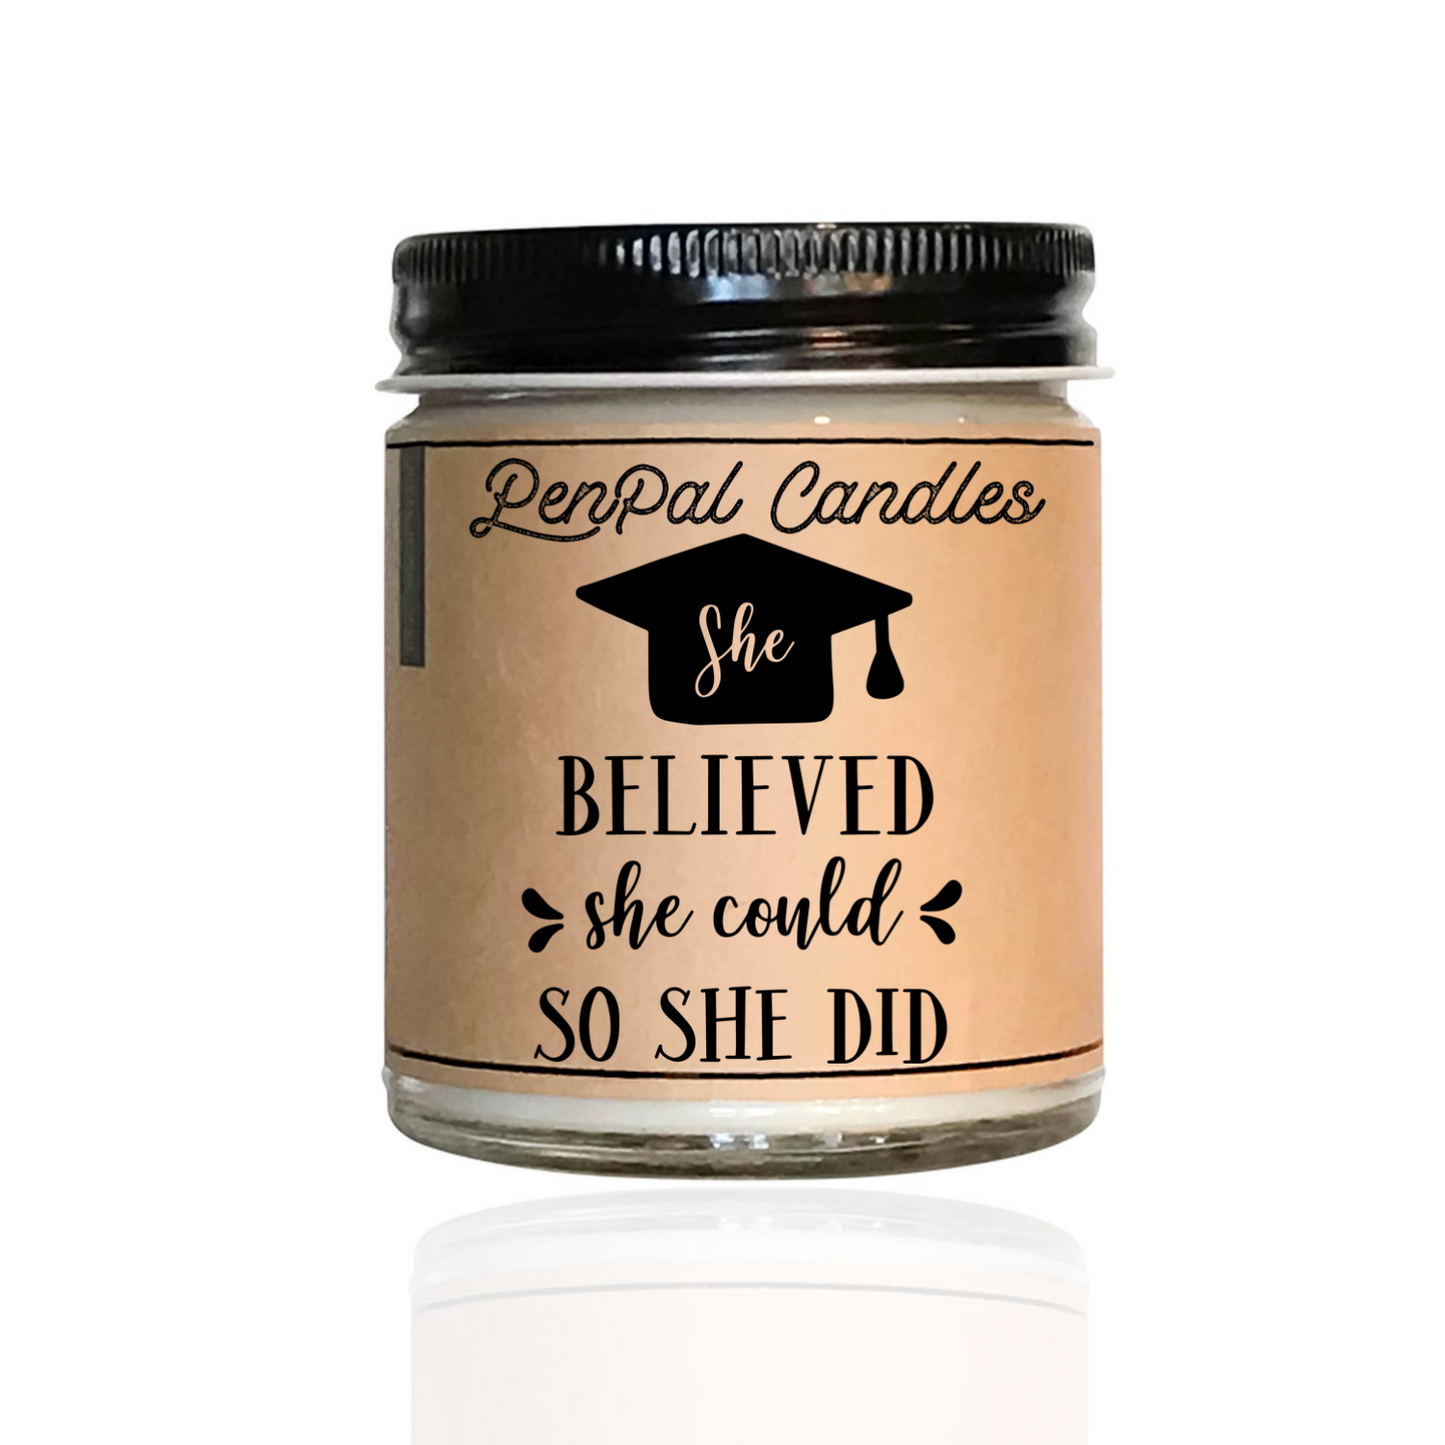 She Believed She Could and She Did Candle